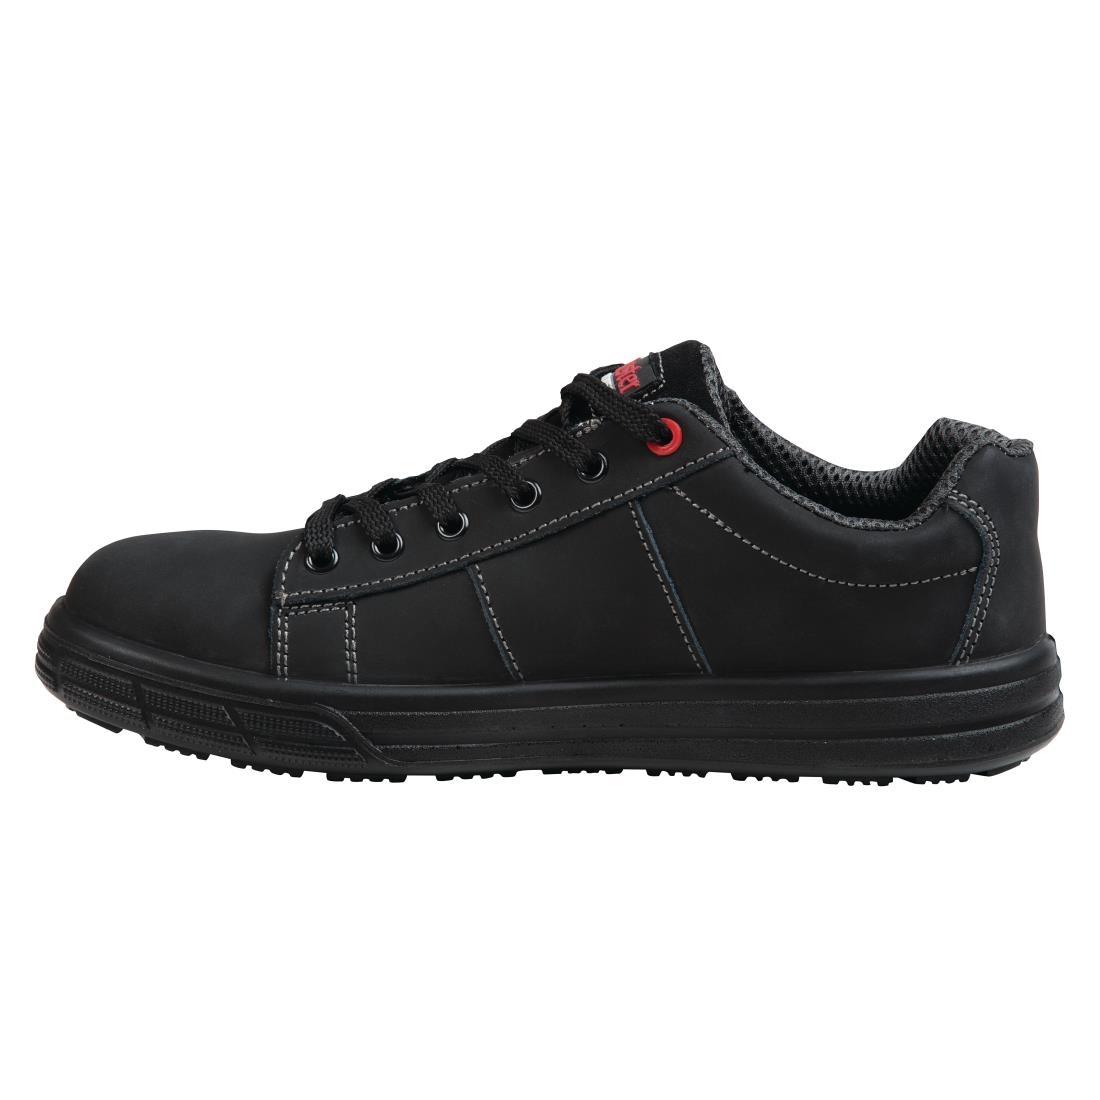 Slipbuster Safety Trainers Black 40 - BB420-40  - 6